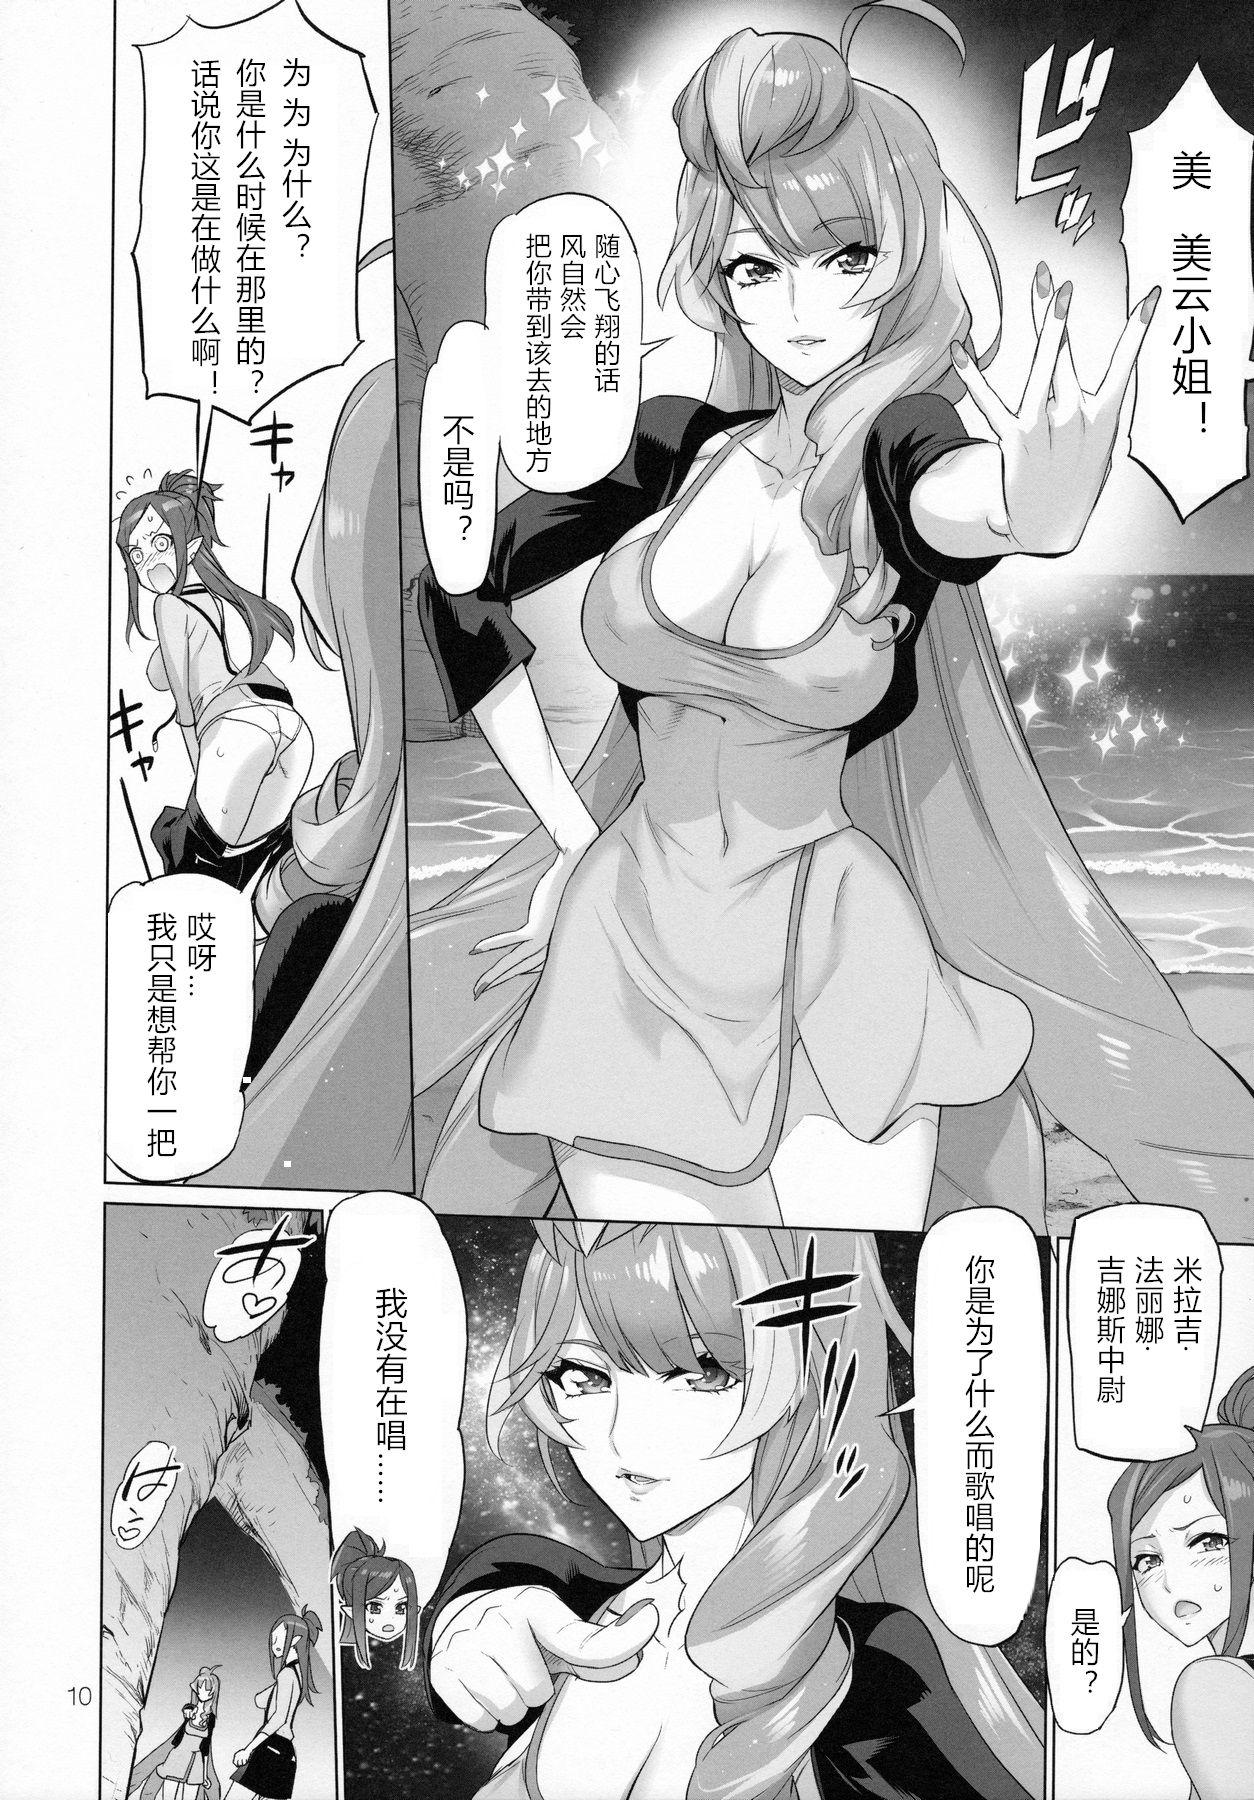 Asses Mirage Attack! - Macross delta Brazzers - Page 9